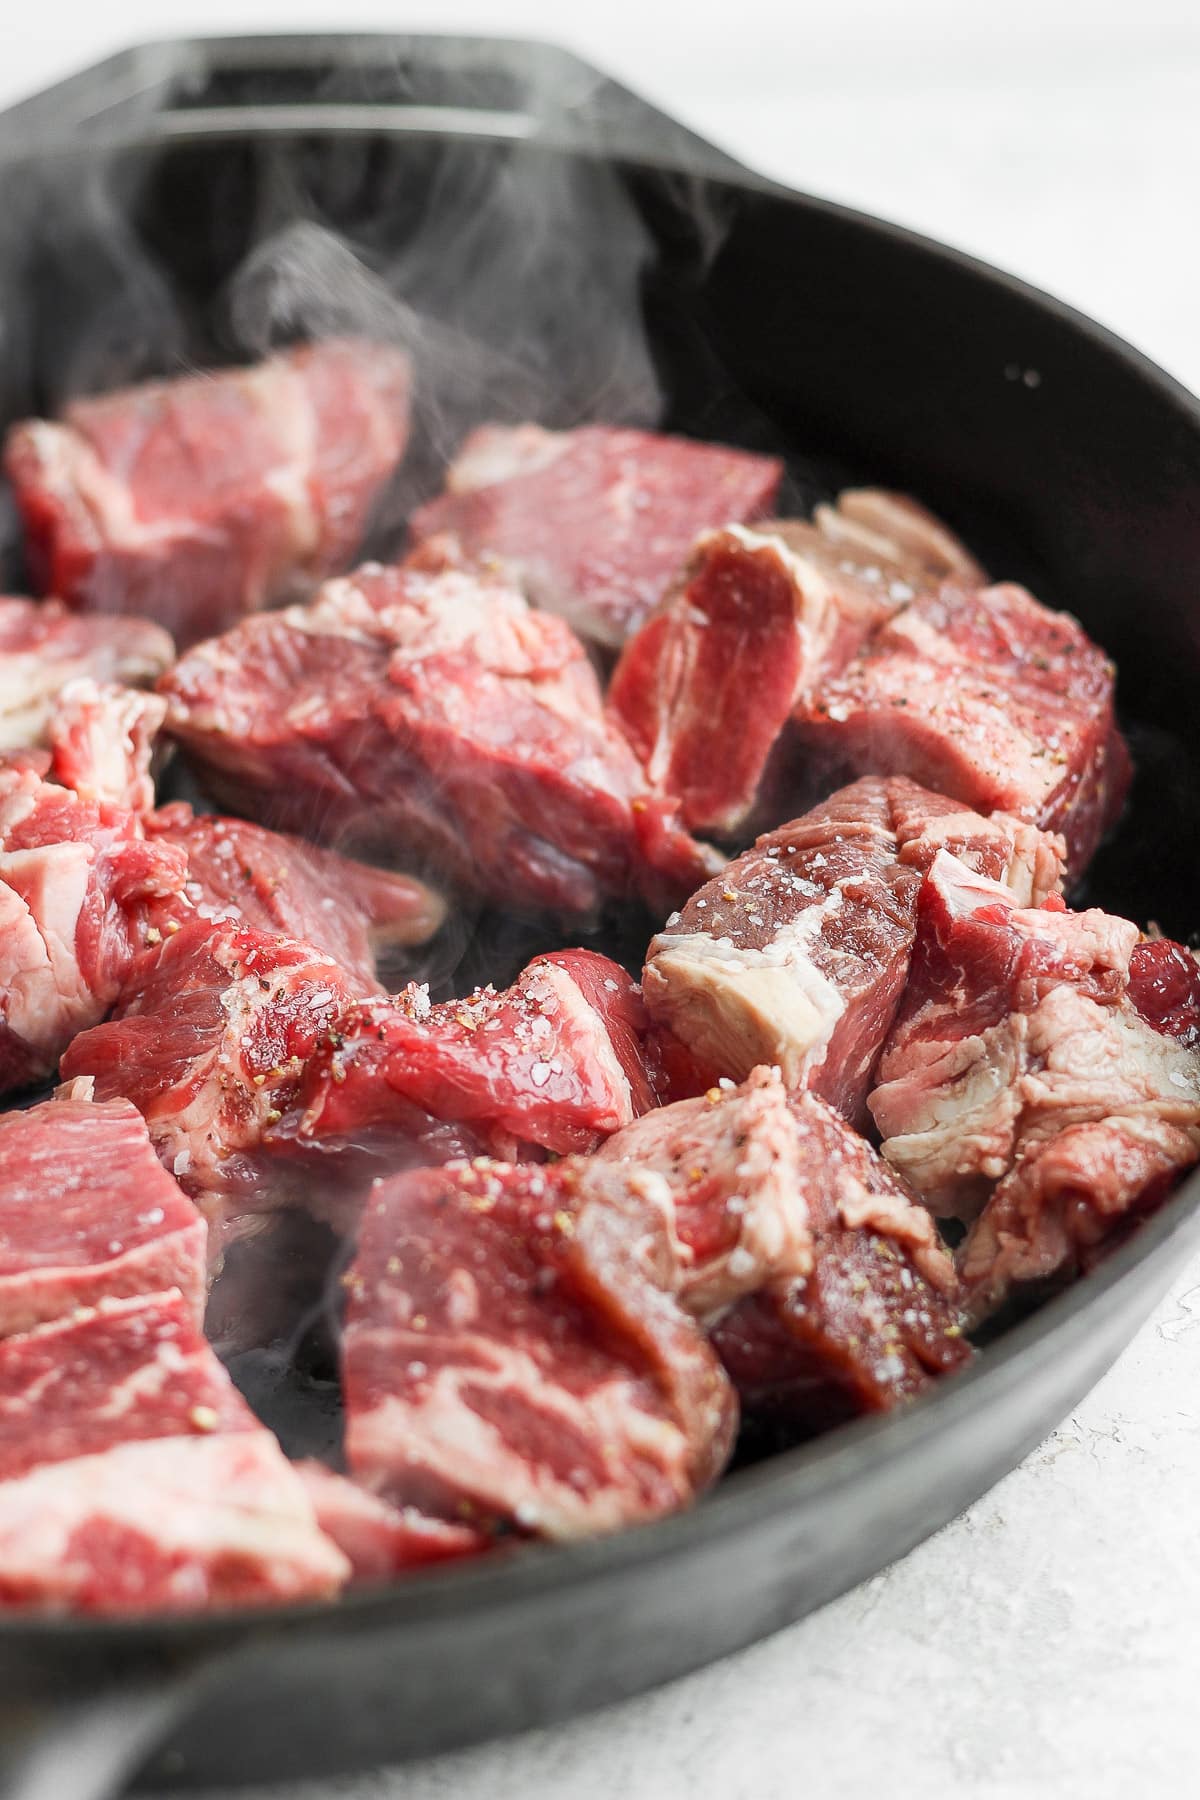 Beef chunks being seared in a cast iron skillet.